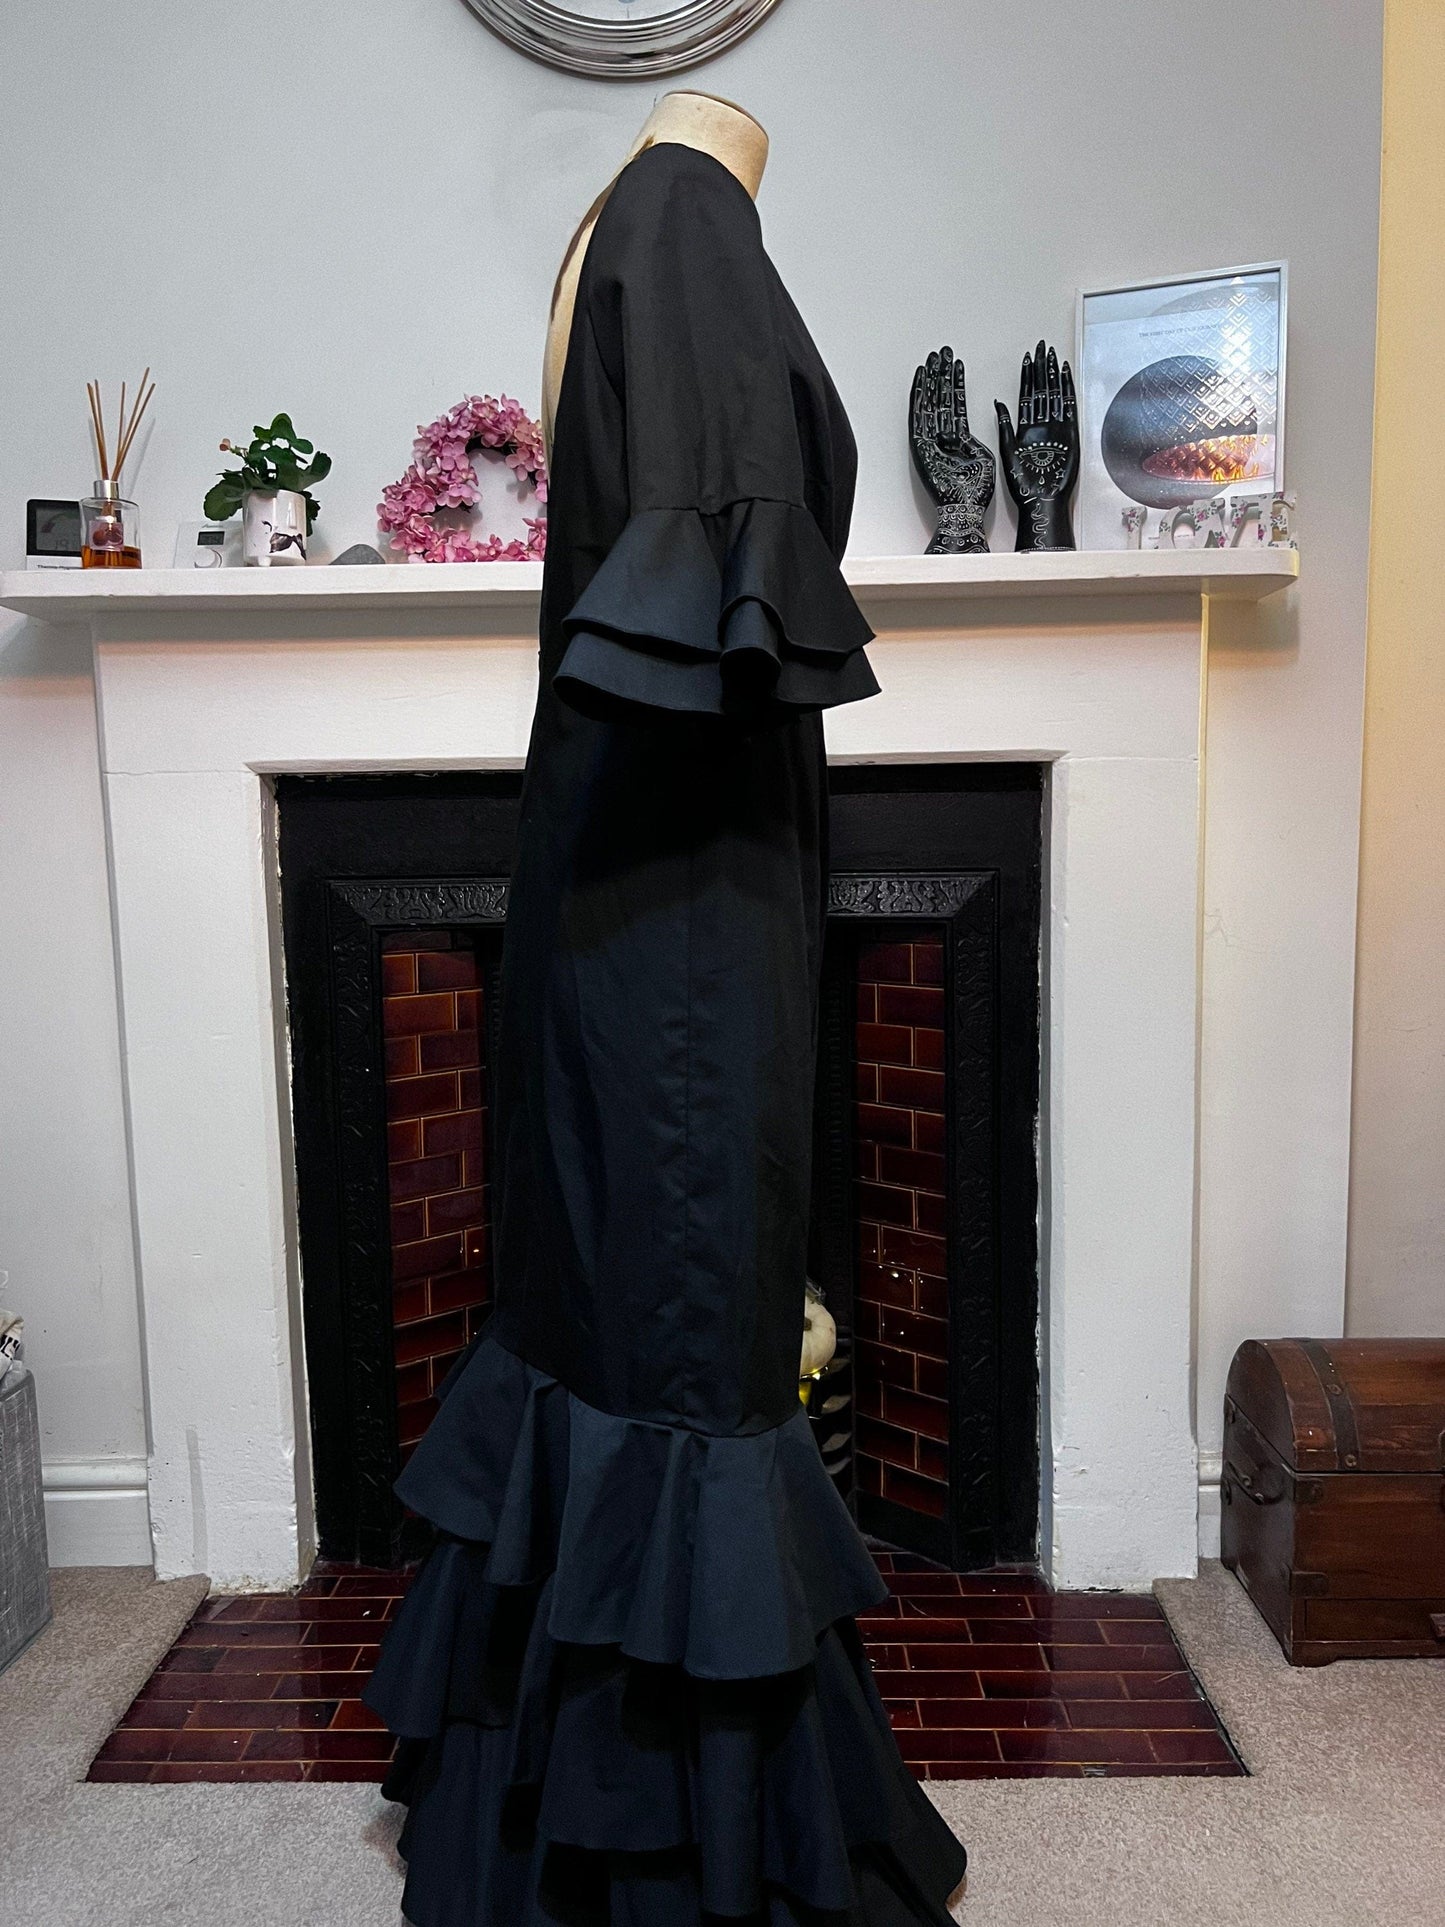 Vintage Black Spanish Dress - Hand Made Vintage Dress in a flamenco style with ruffles to sleeves and hem - Black Cotton Ball Gown